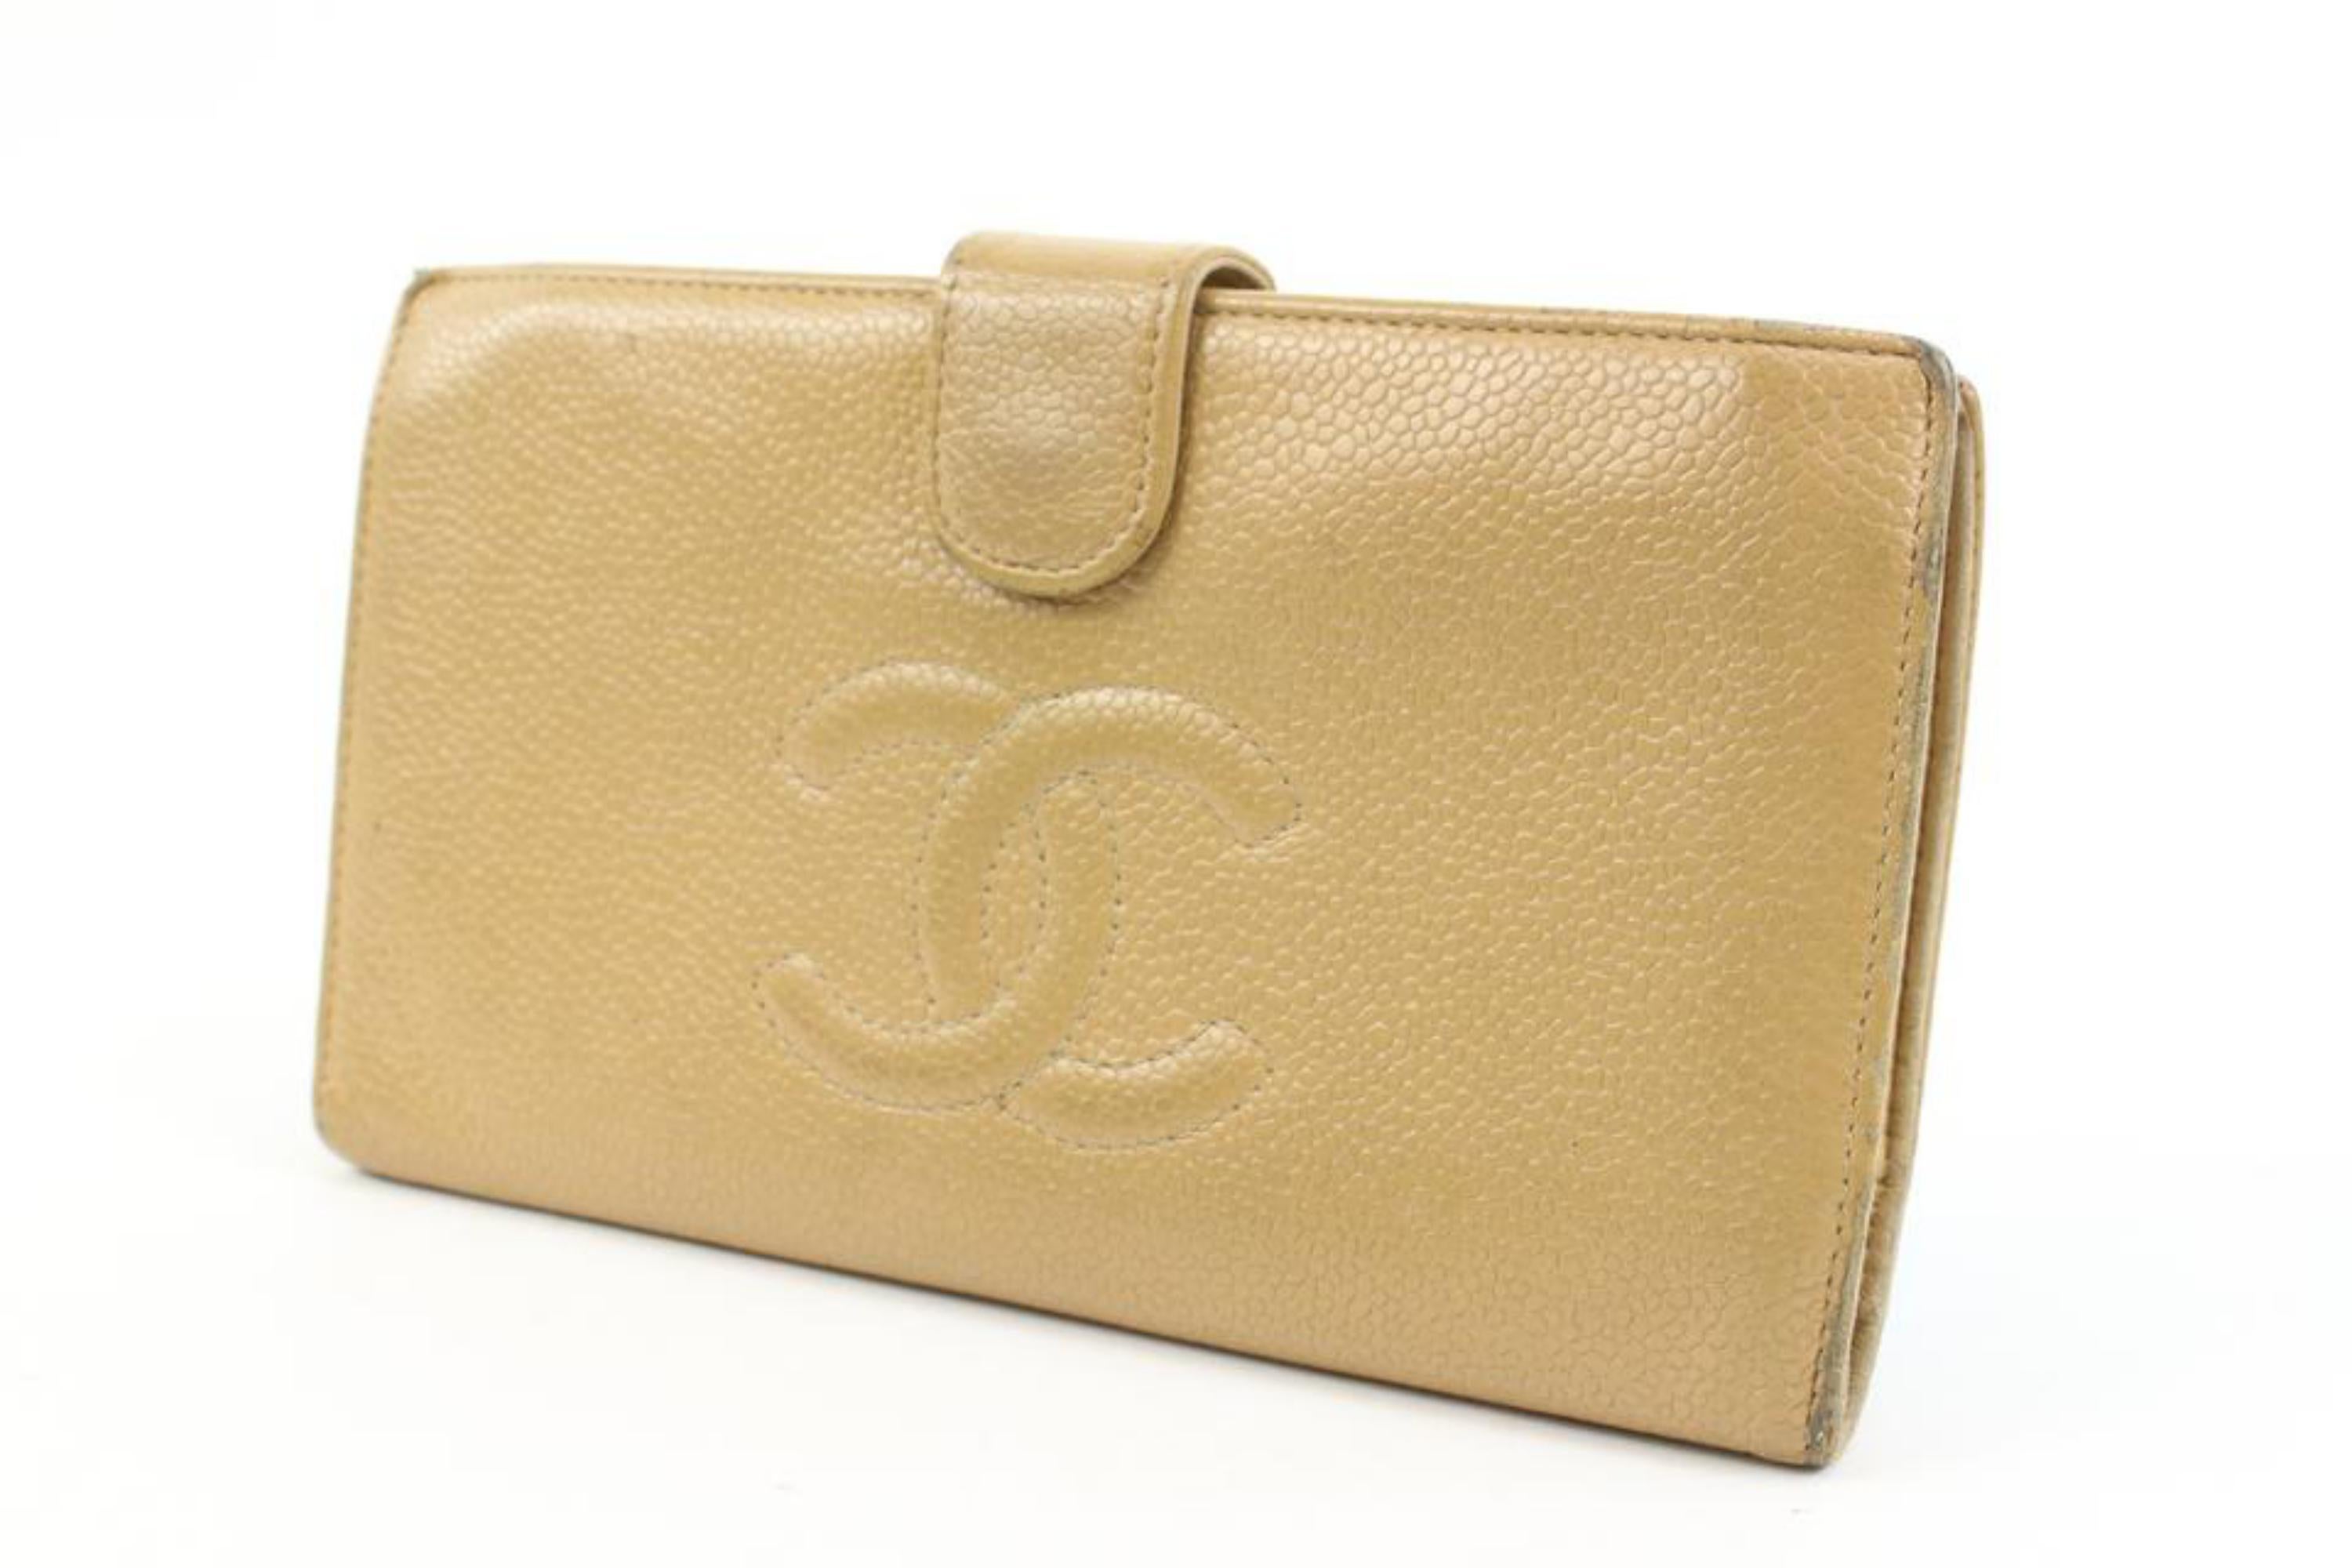 Chanel Beige Caviar Leather CC Logo Long Bifold Flap Wallet 41ck224s
Date Code/Serial Number: 8139642
Made In: France
Measurements: Length:  6.75